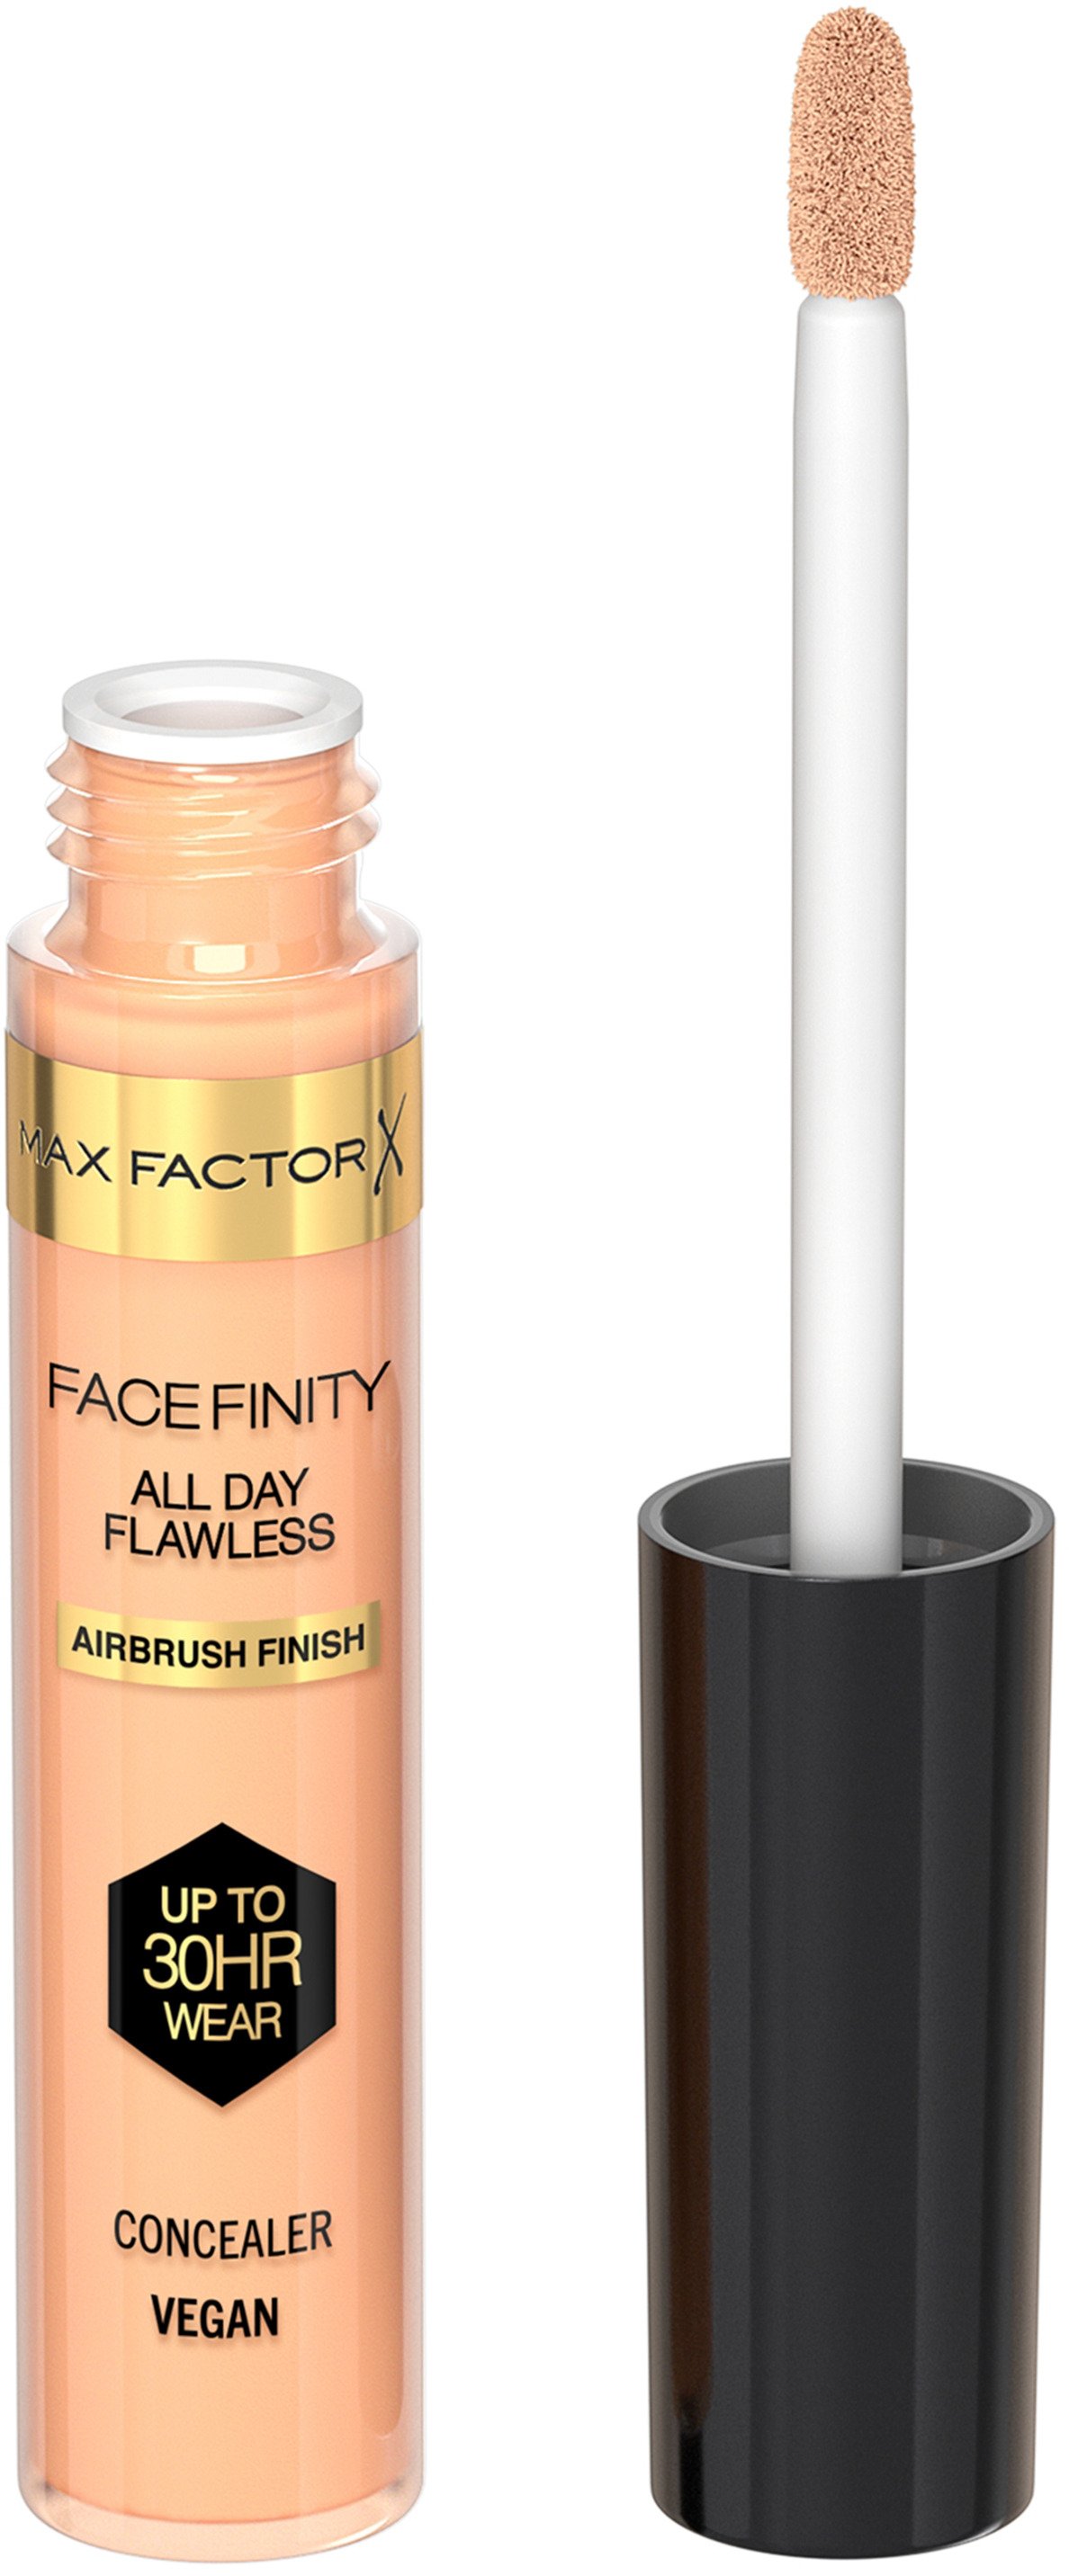 Max Factor Facefinity 030 All Day Flawless Concealer 8 ml